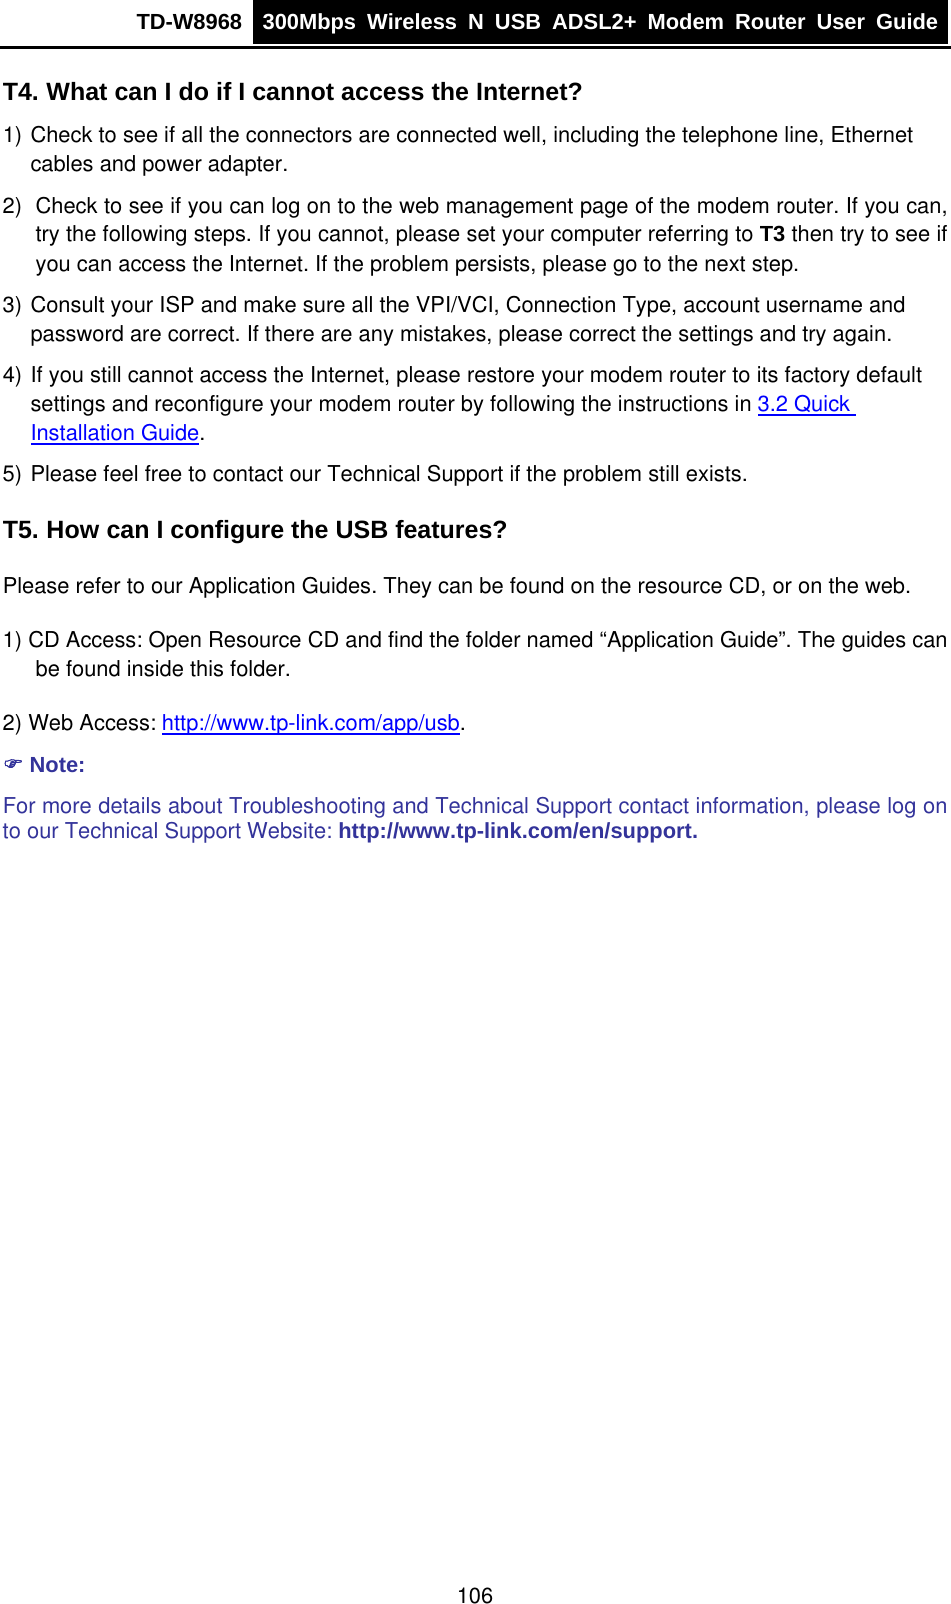 TD-W8968  300Mbps Wireless N USB ADSL2+ Modem Router User Guide  T4. What can I do if I cannot access the Internet? 1) Check to see if all the connectors are connected well, including the telephone line, Ethernet cables and power adapter. 2)  Check to see if you can log on to the web management page of the modem router. If you can, try the following steps. If you cannot, please set your computer referring to T3 then try to see if you can access the Internet. If the problem persists, please go to the next step. 3) Consult your ISP and make sure all the VPI/VCI, Connection Type, account username and password are correct. If there are any mistakes, please correct the settings and try again. 4) If you still cannot access the Internet, please restore your modem router to its factory default settings and reconfigure your modem router by following the instructions in 3.2 Quick Installation Guide. 5) Please feel free to contact our Technical Support if the problem still exists. T5. How can I configure the USB features? Please refer to our Application Guides. They can be found on the resource CD, or on the web. 1) CD Access: Open Resource CD and find the folder named “Application Guide”. The guides can be found inside this folder. 2) Web Access: http://www.tp-link.com/app/usb. ) Note: For more details about Troubleshooting and Technical Support contact information, please log on to our Technical Support Website: http://www.tp-link.com/en/support.  106 